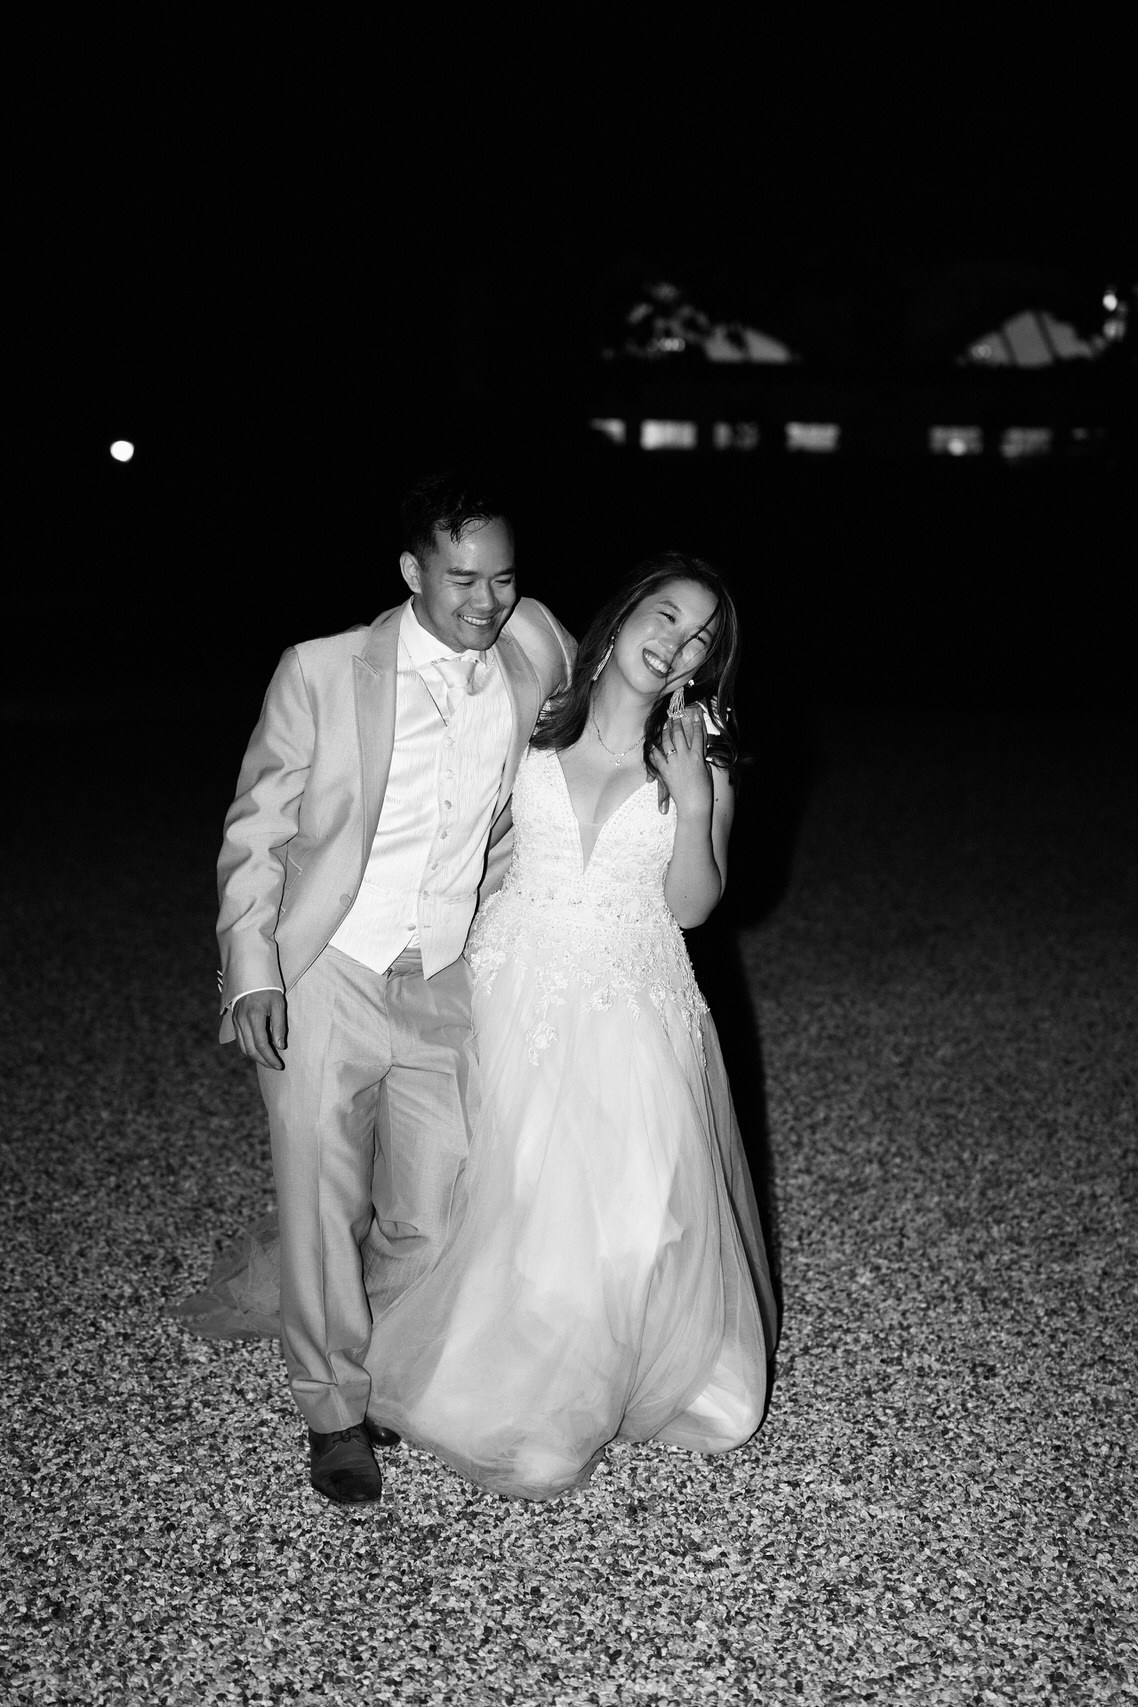 A nighttime photo of a bride and groom in black and white.